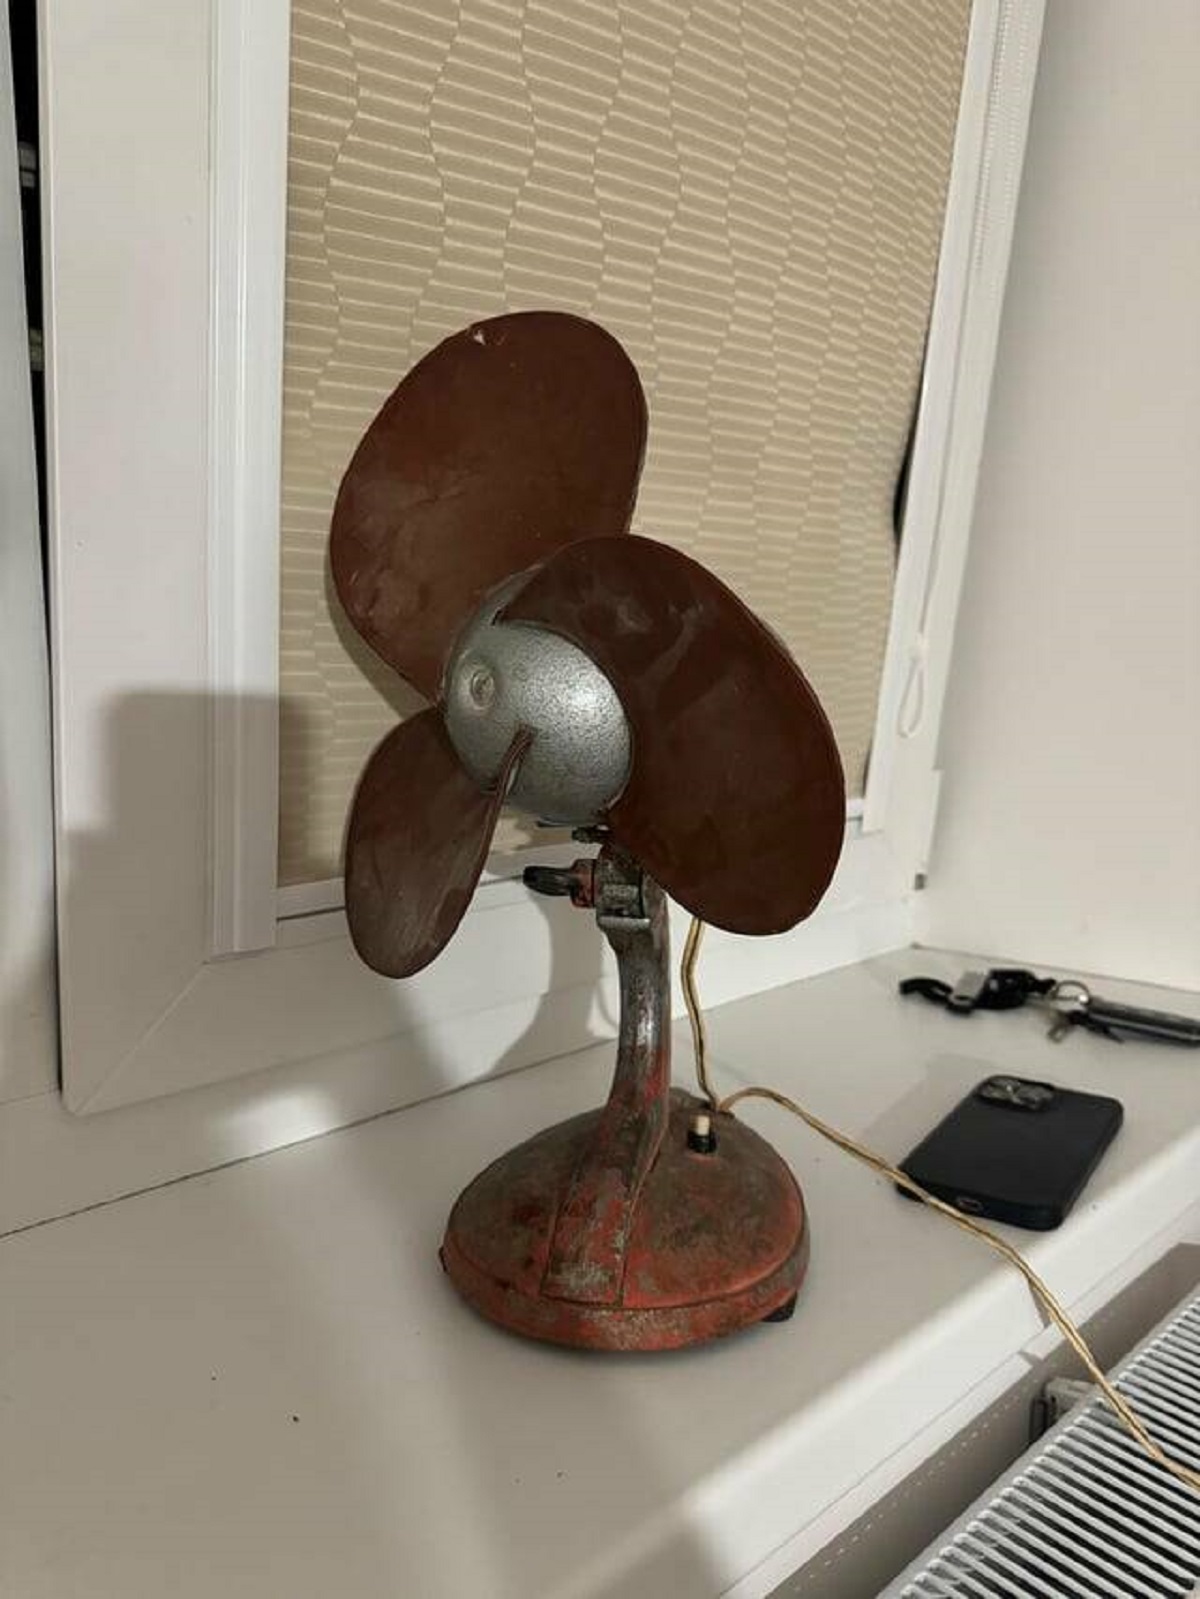 "I’m still using a fan that was made in 1967"